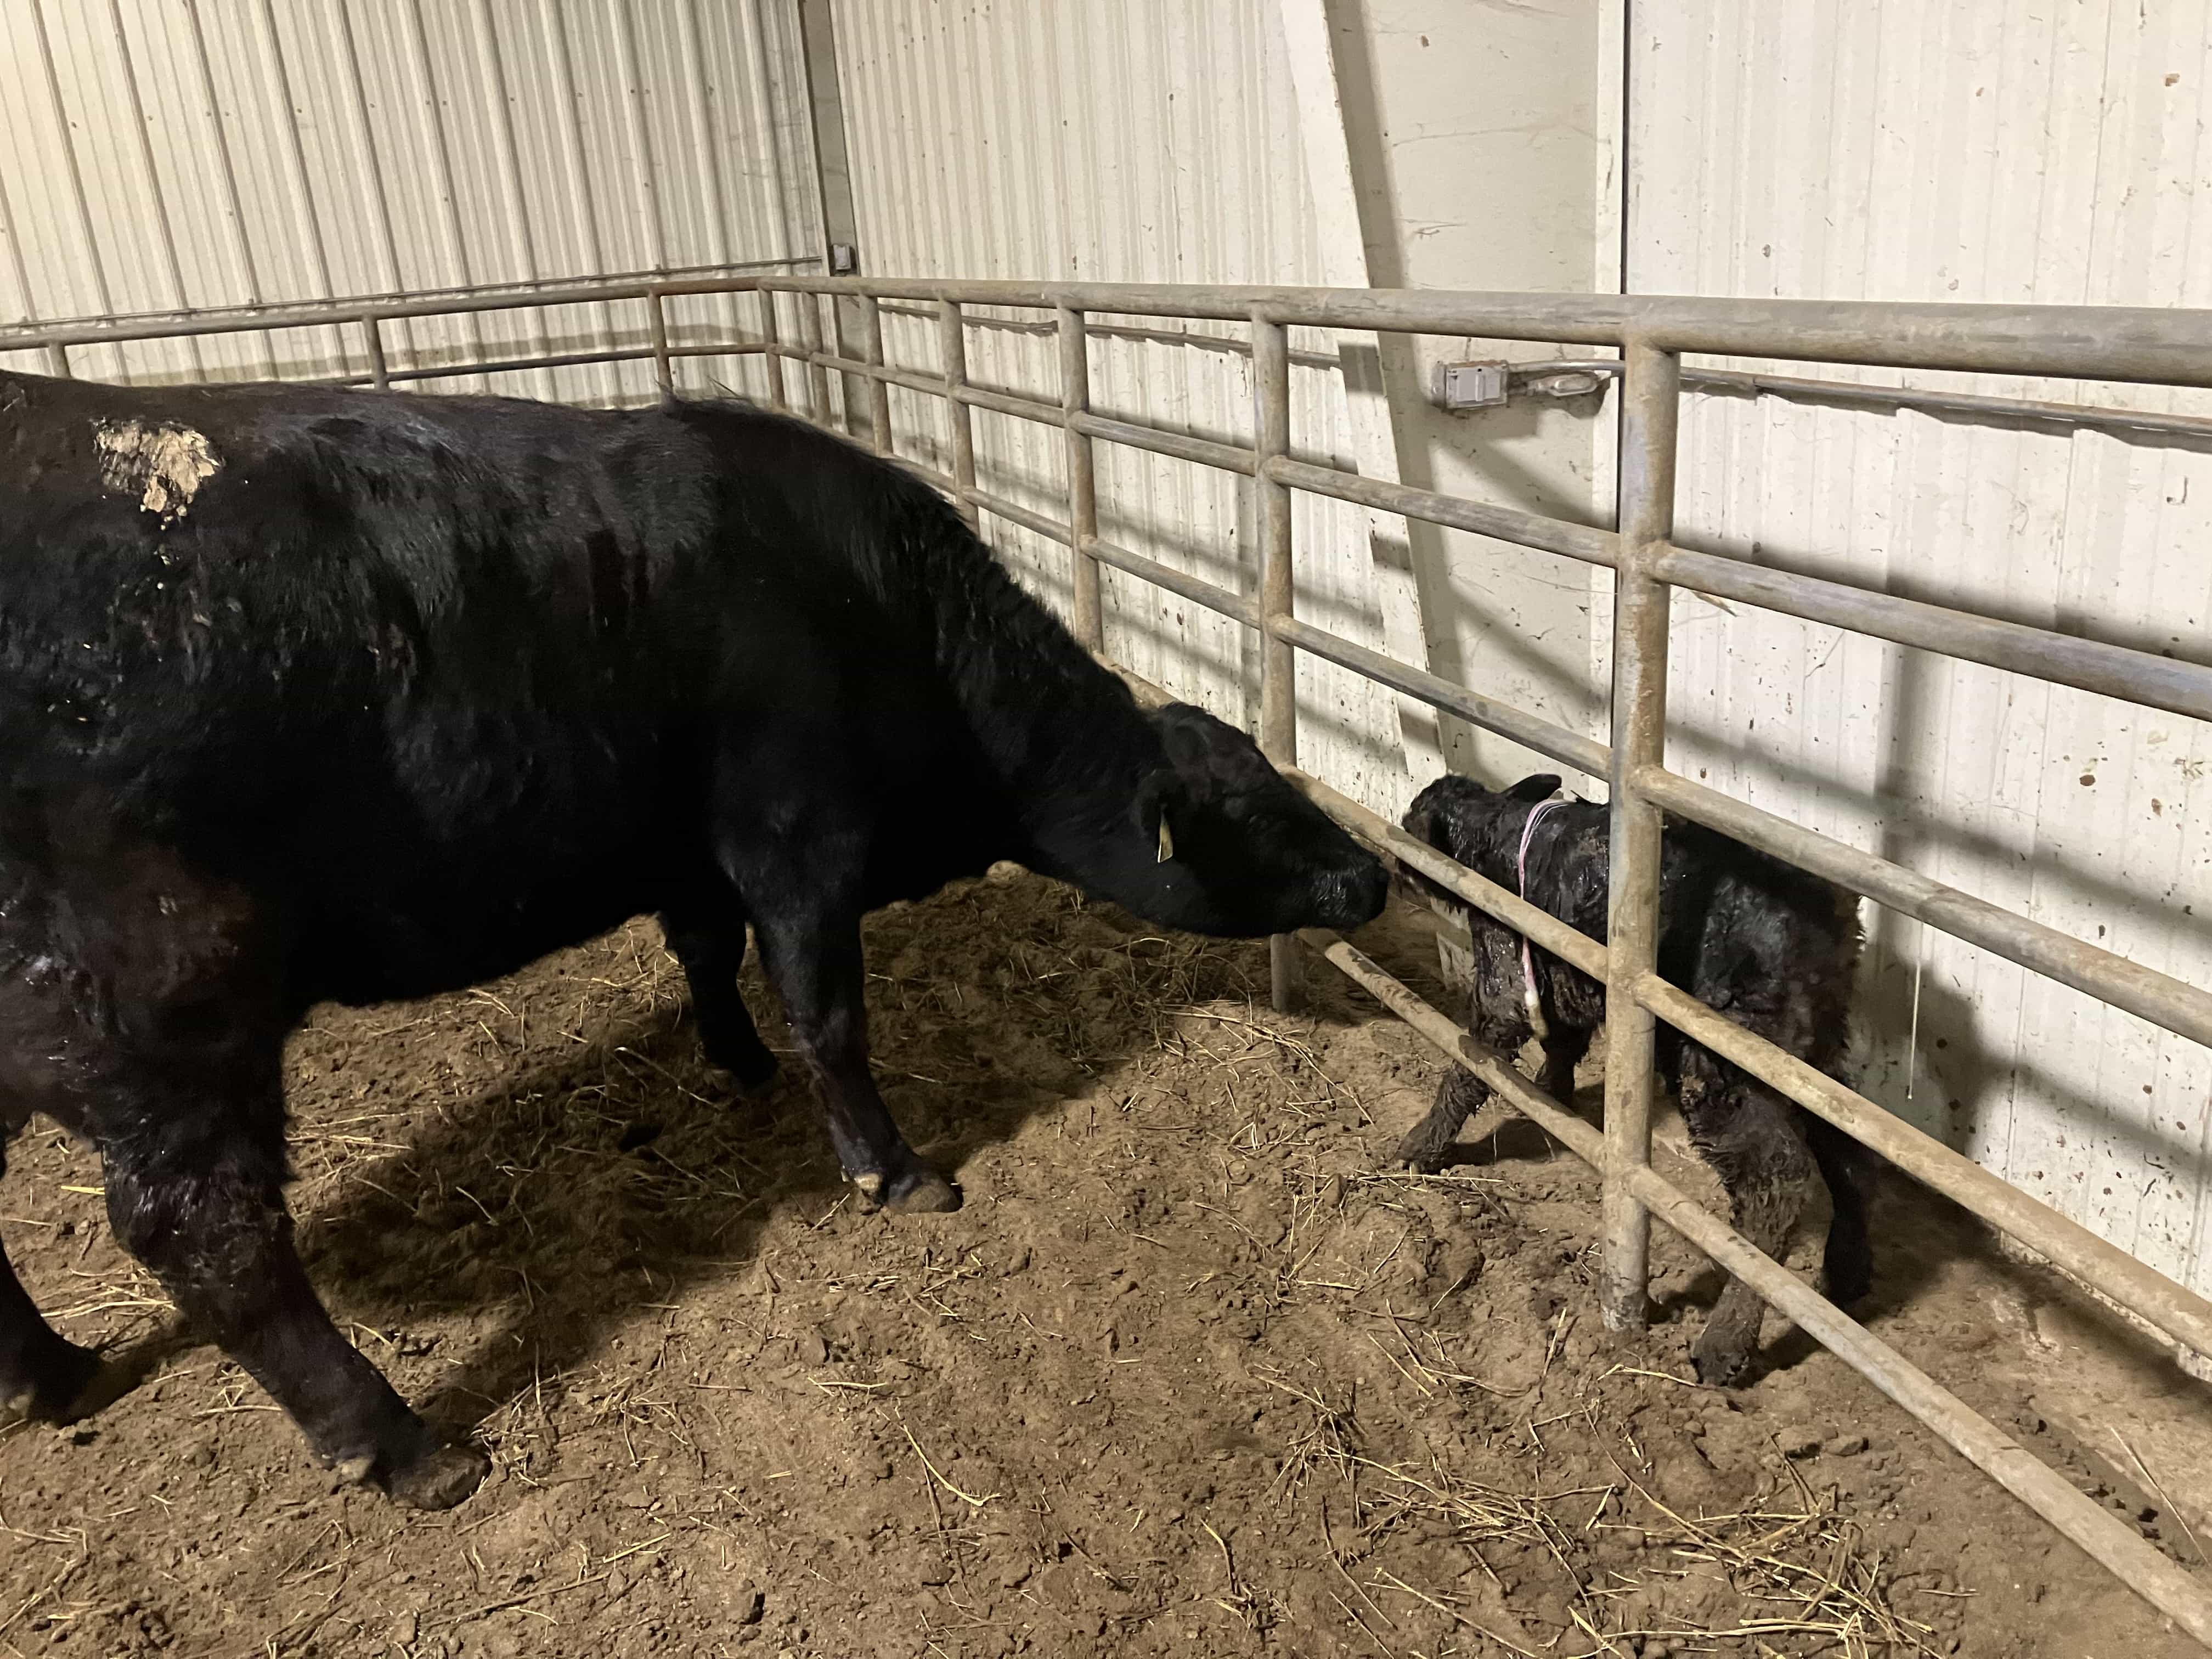 New Calf on the wrong side of the fence